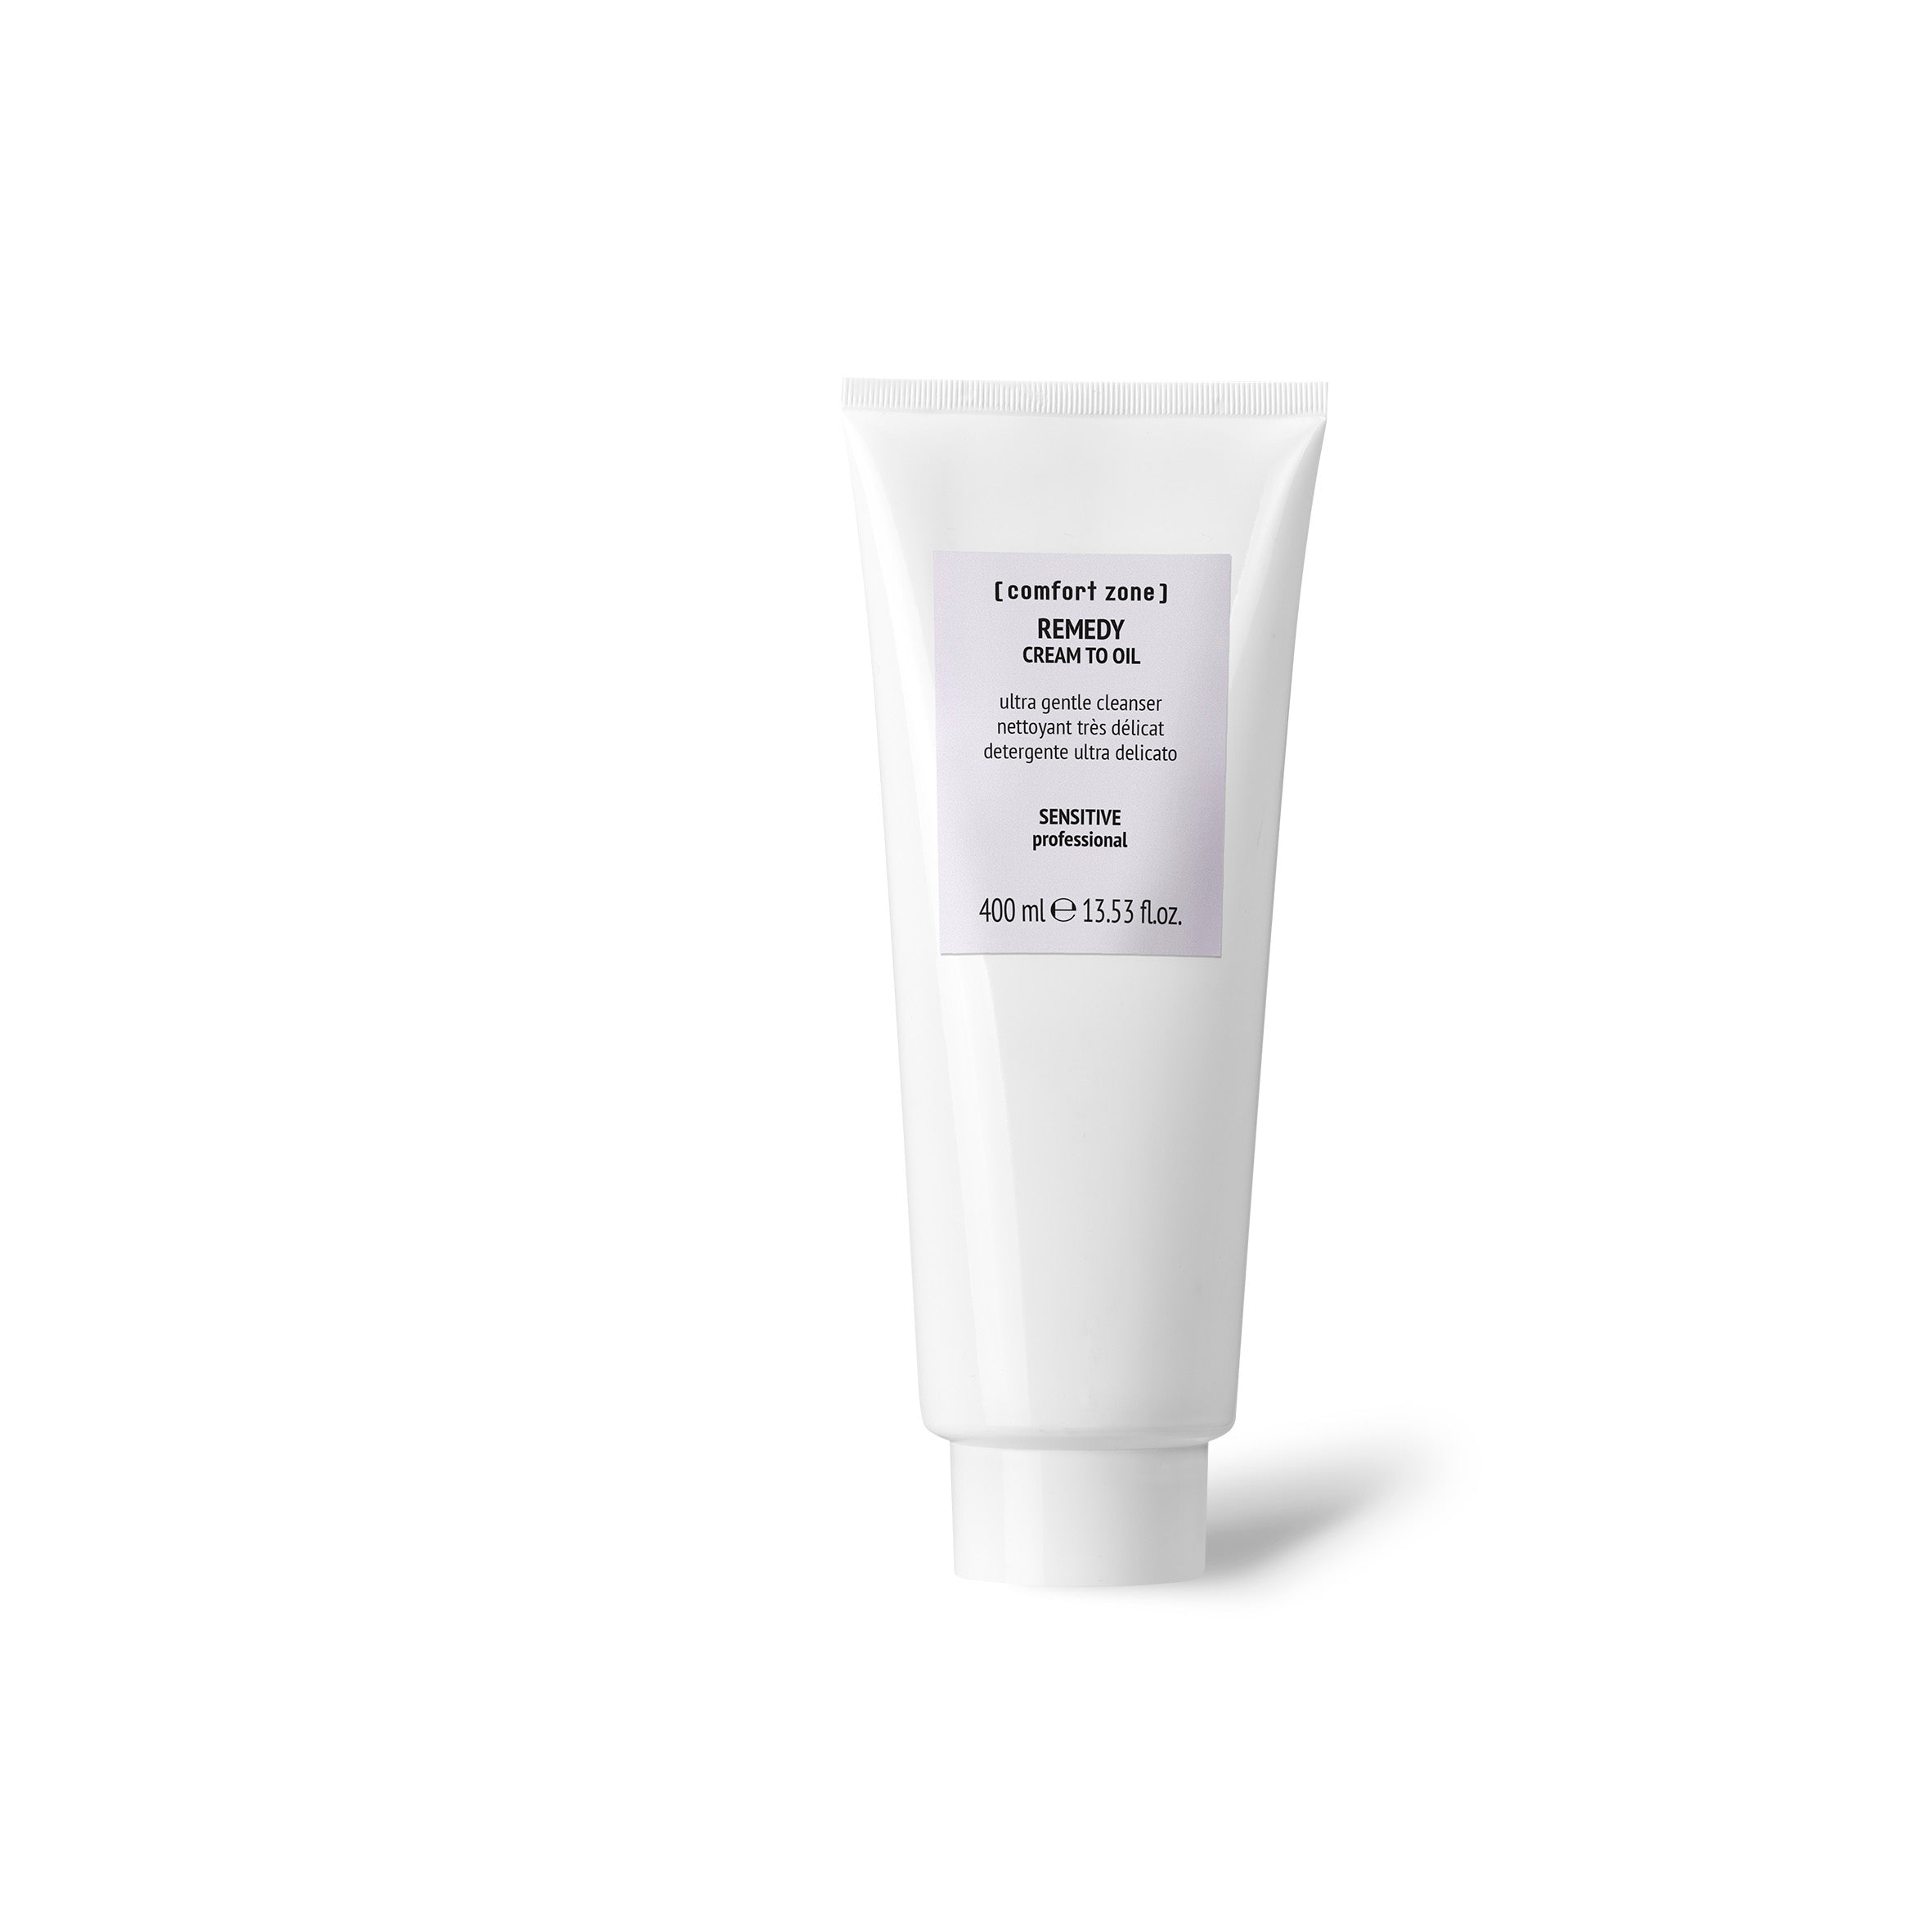 Remedy Cream to Oil (Professional)